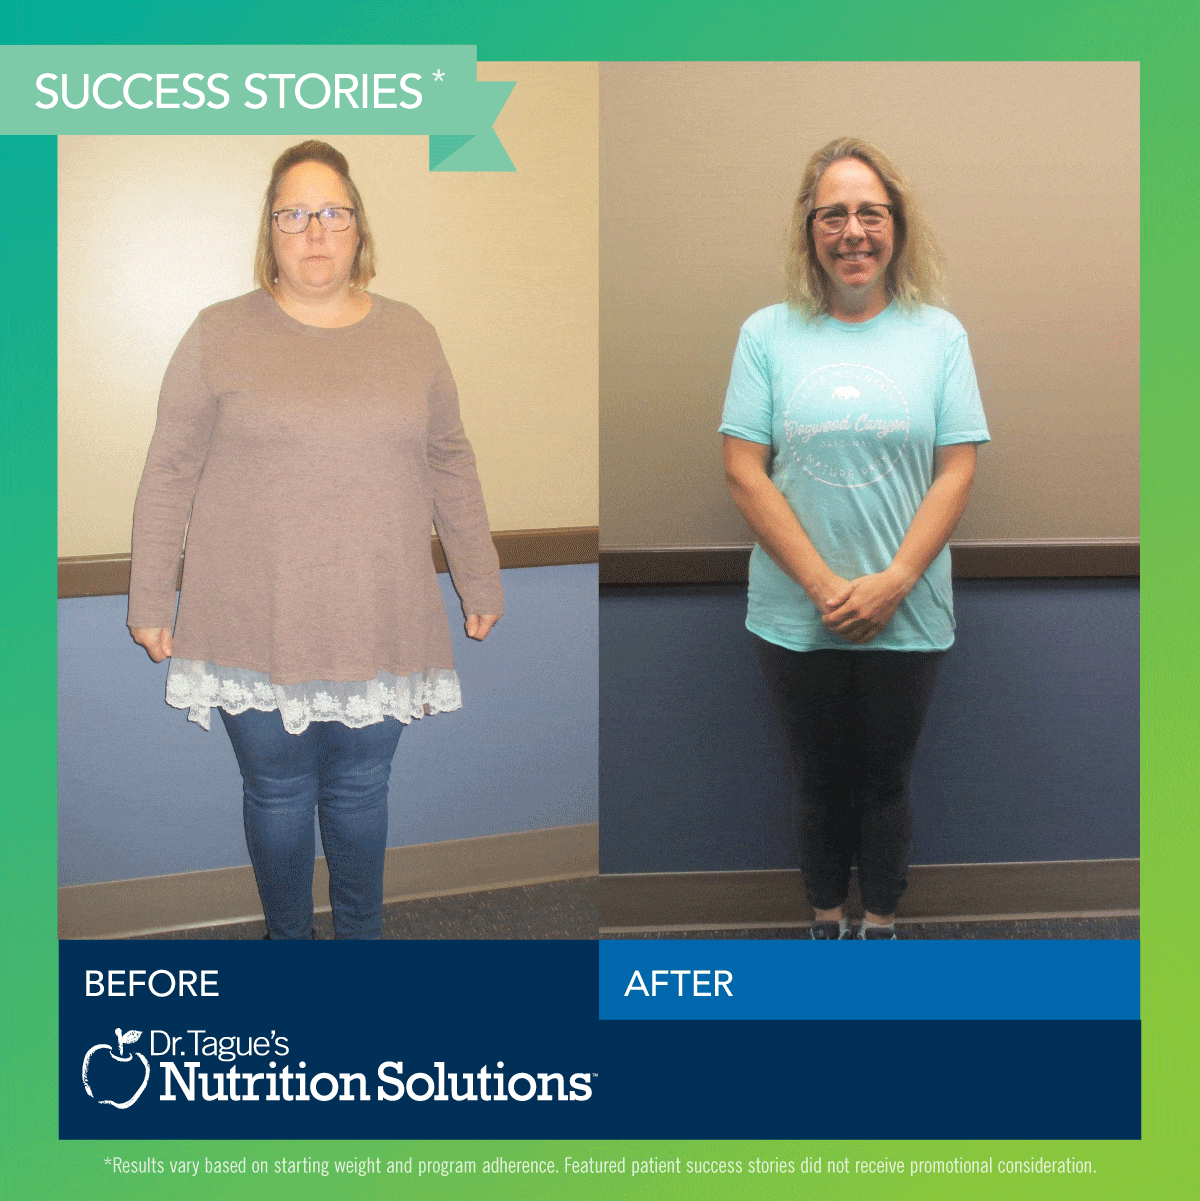 Dr. Tague's Center for Nutrition Success Stories - Melissa lost 90 lbs in 7 months